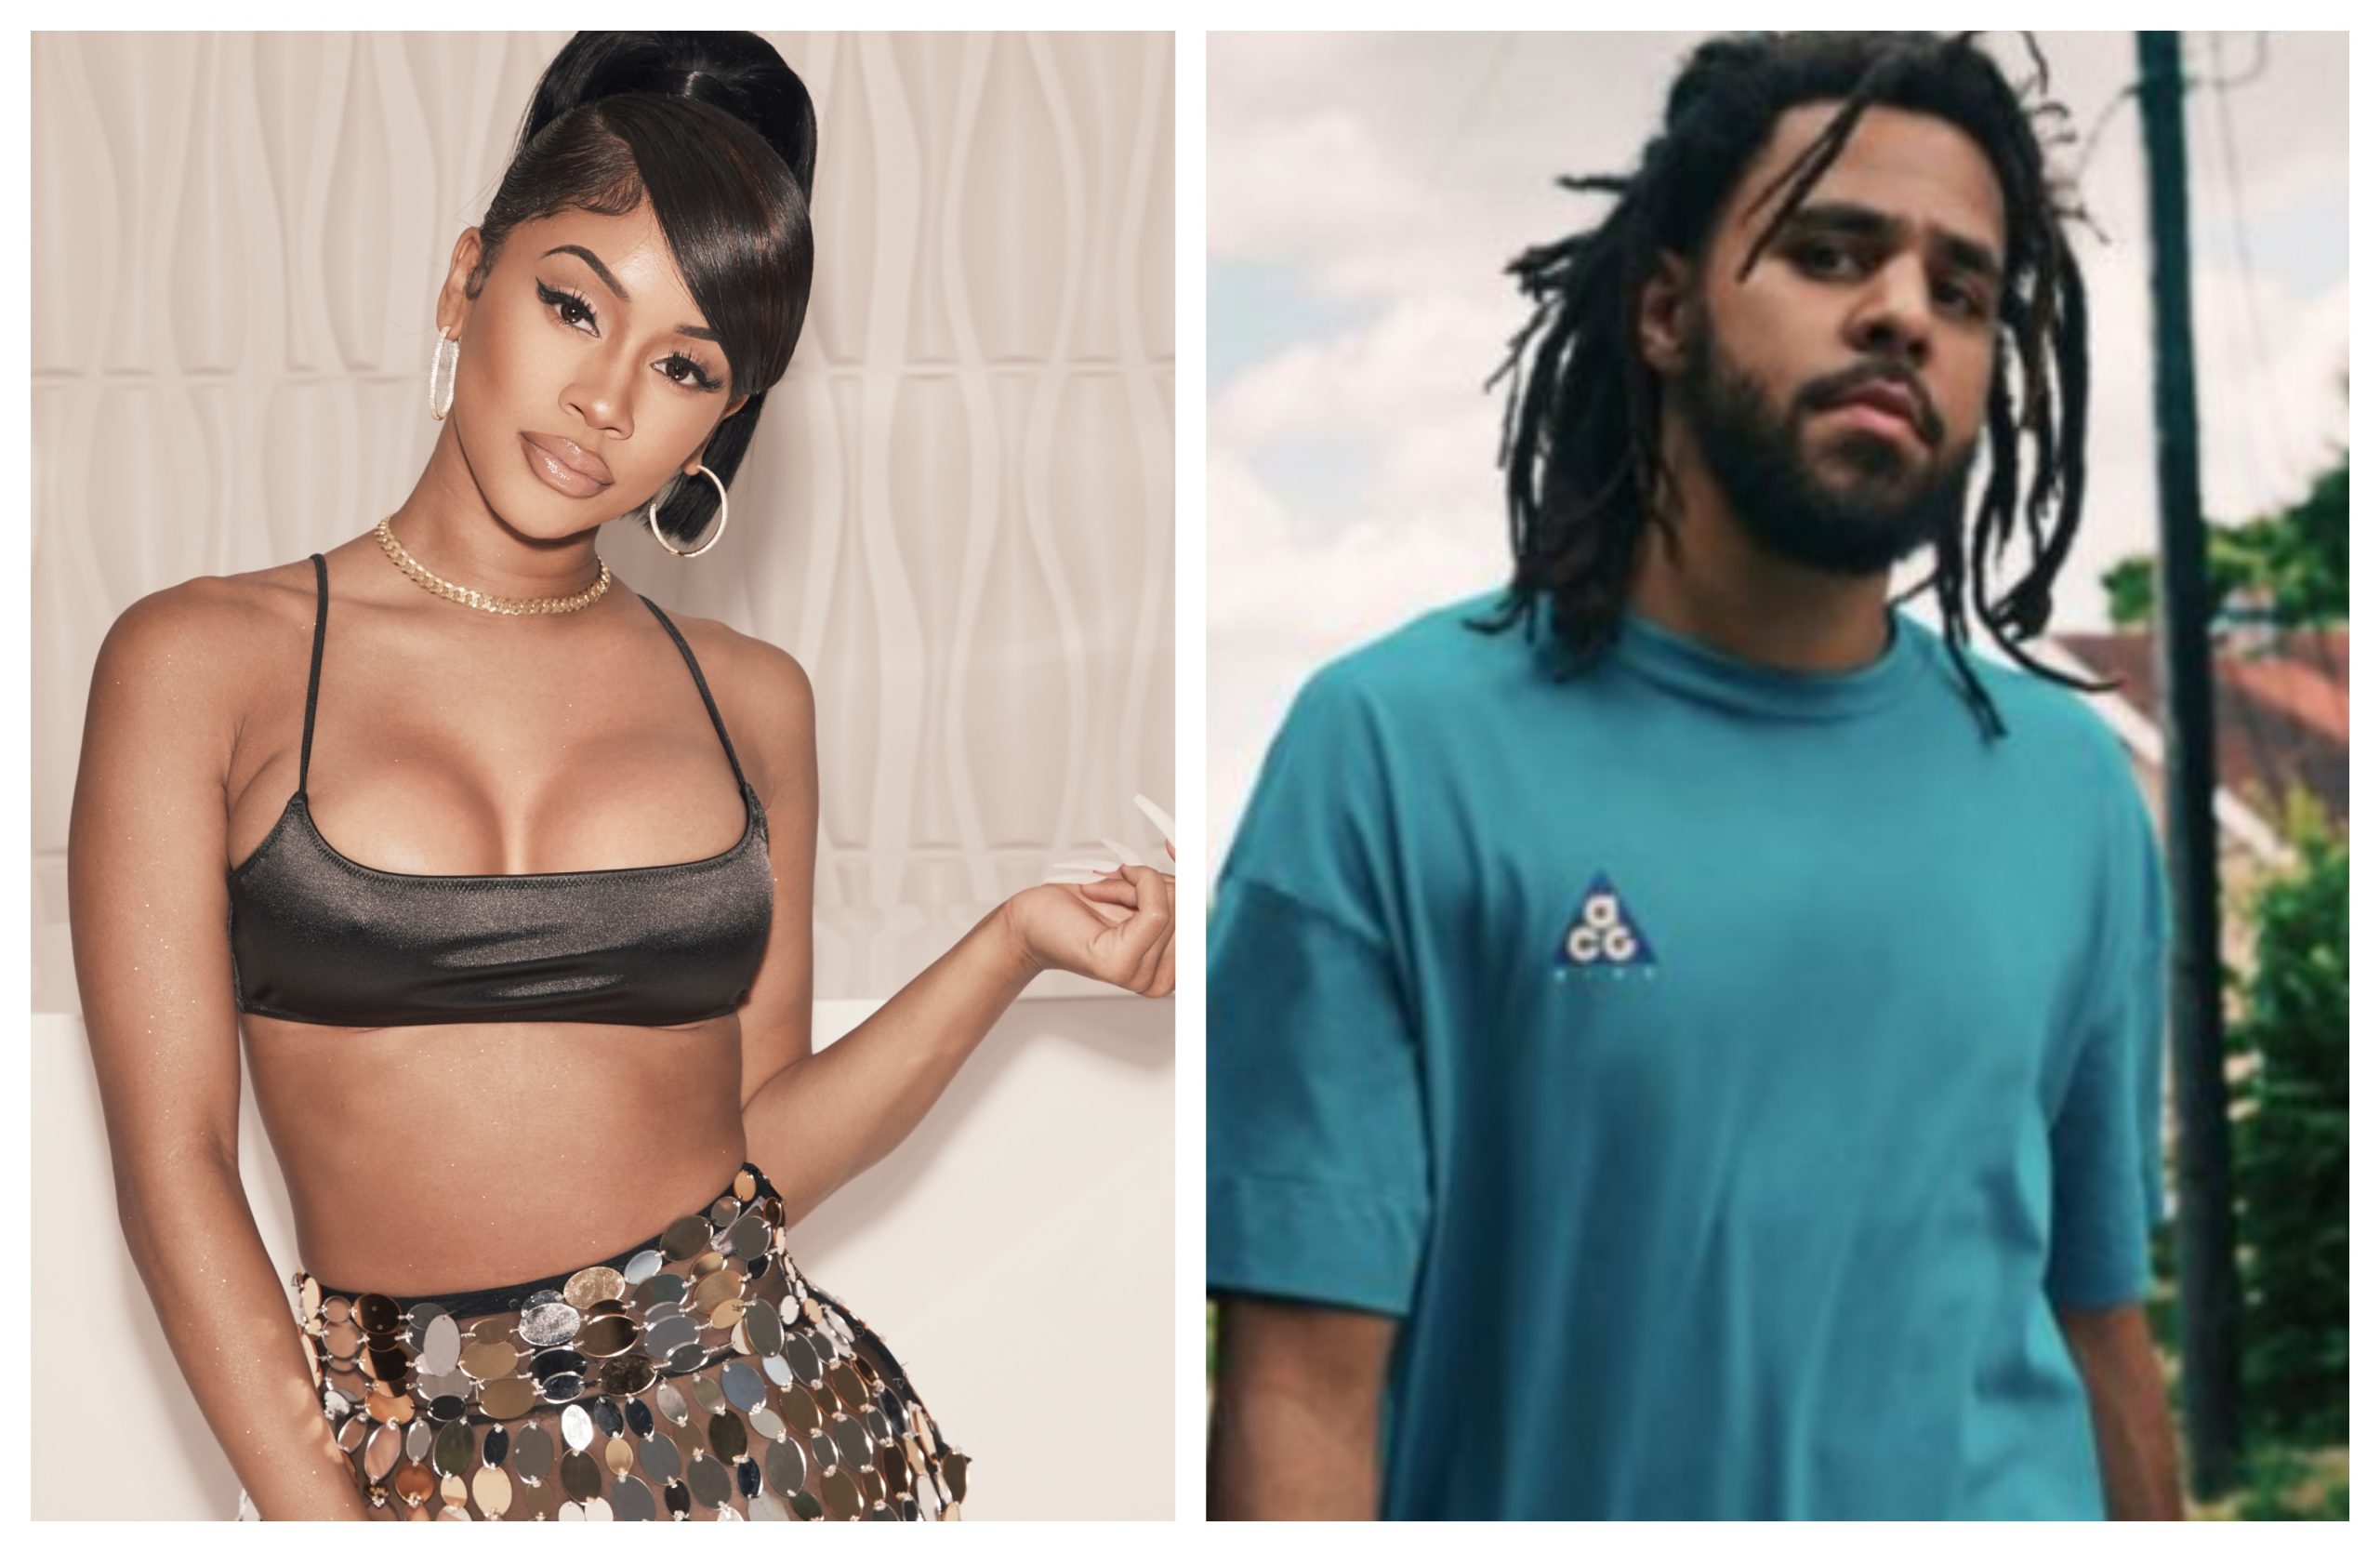 Saweetie Reveals She Wants To Collaborate With J. Cole That Grape Juice